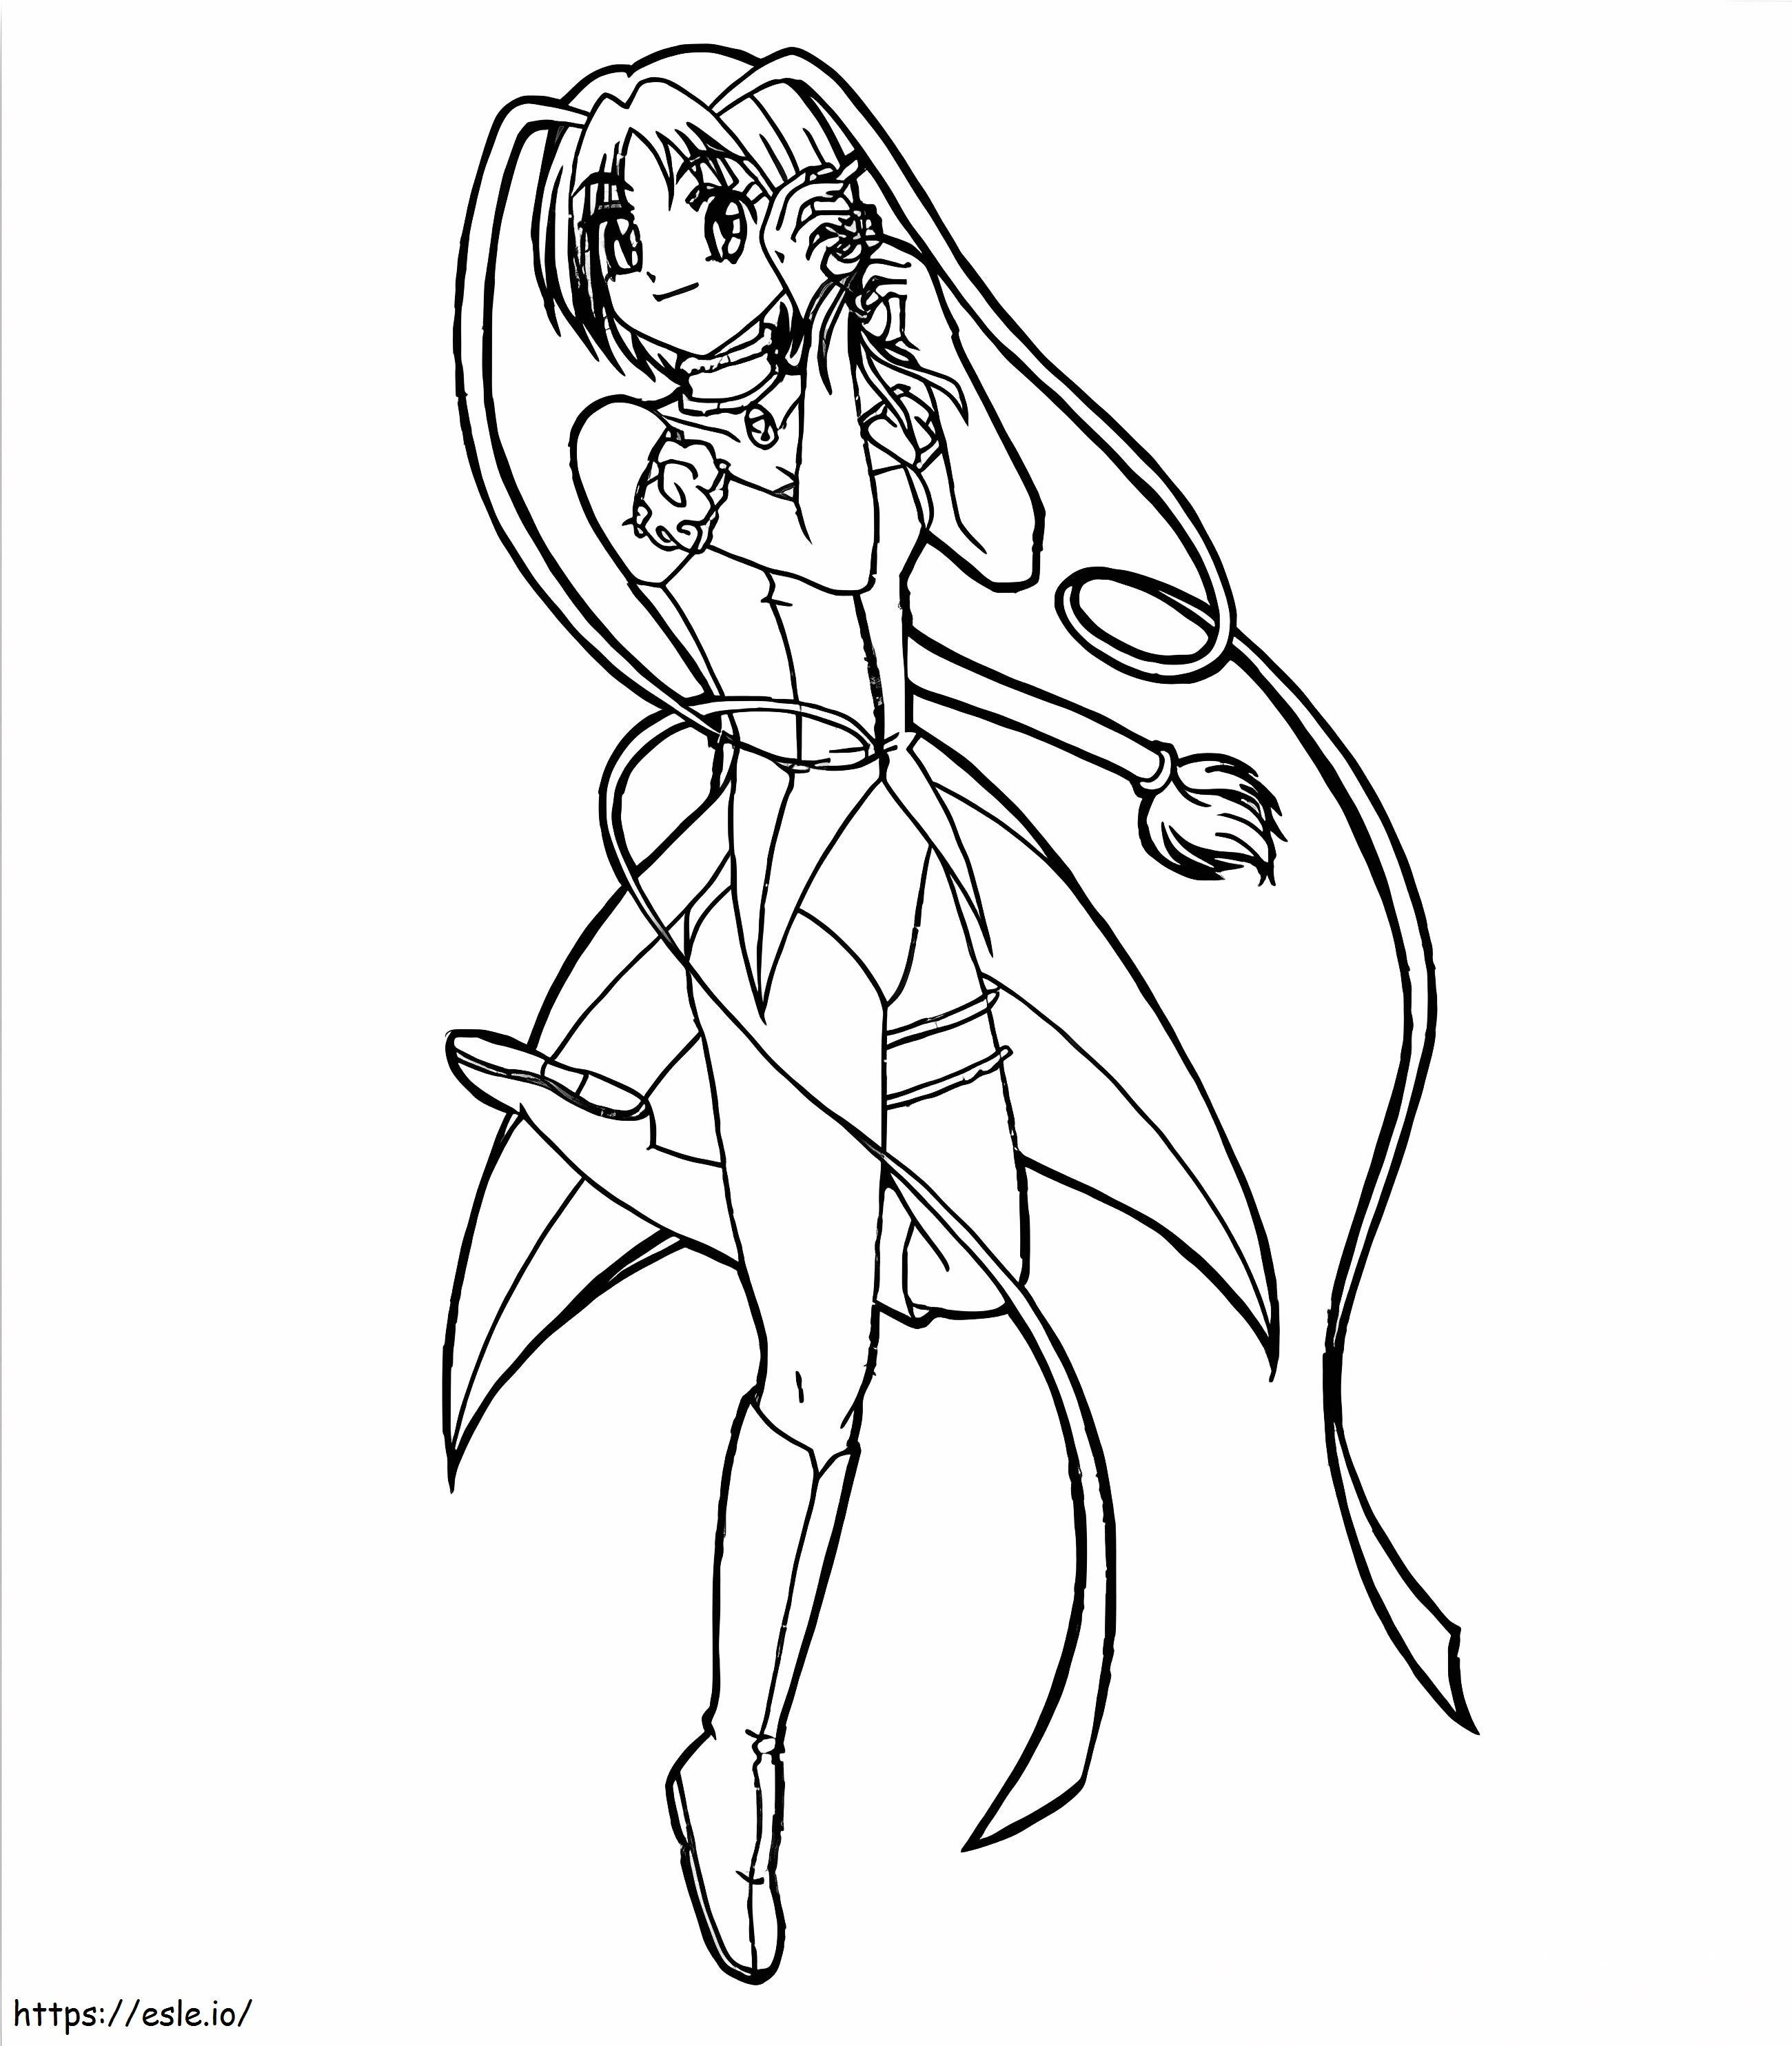 Girl Tokyo Mew Mew coloring page